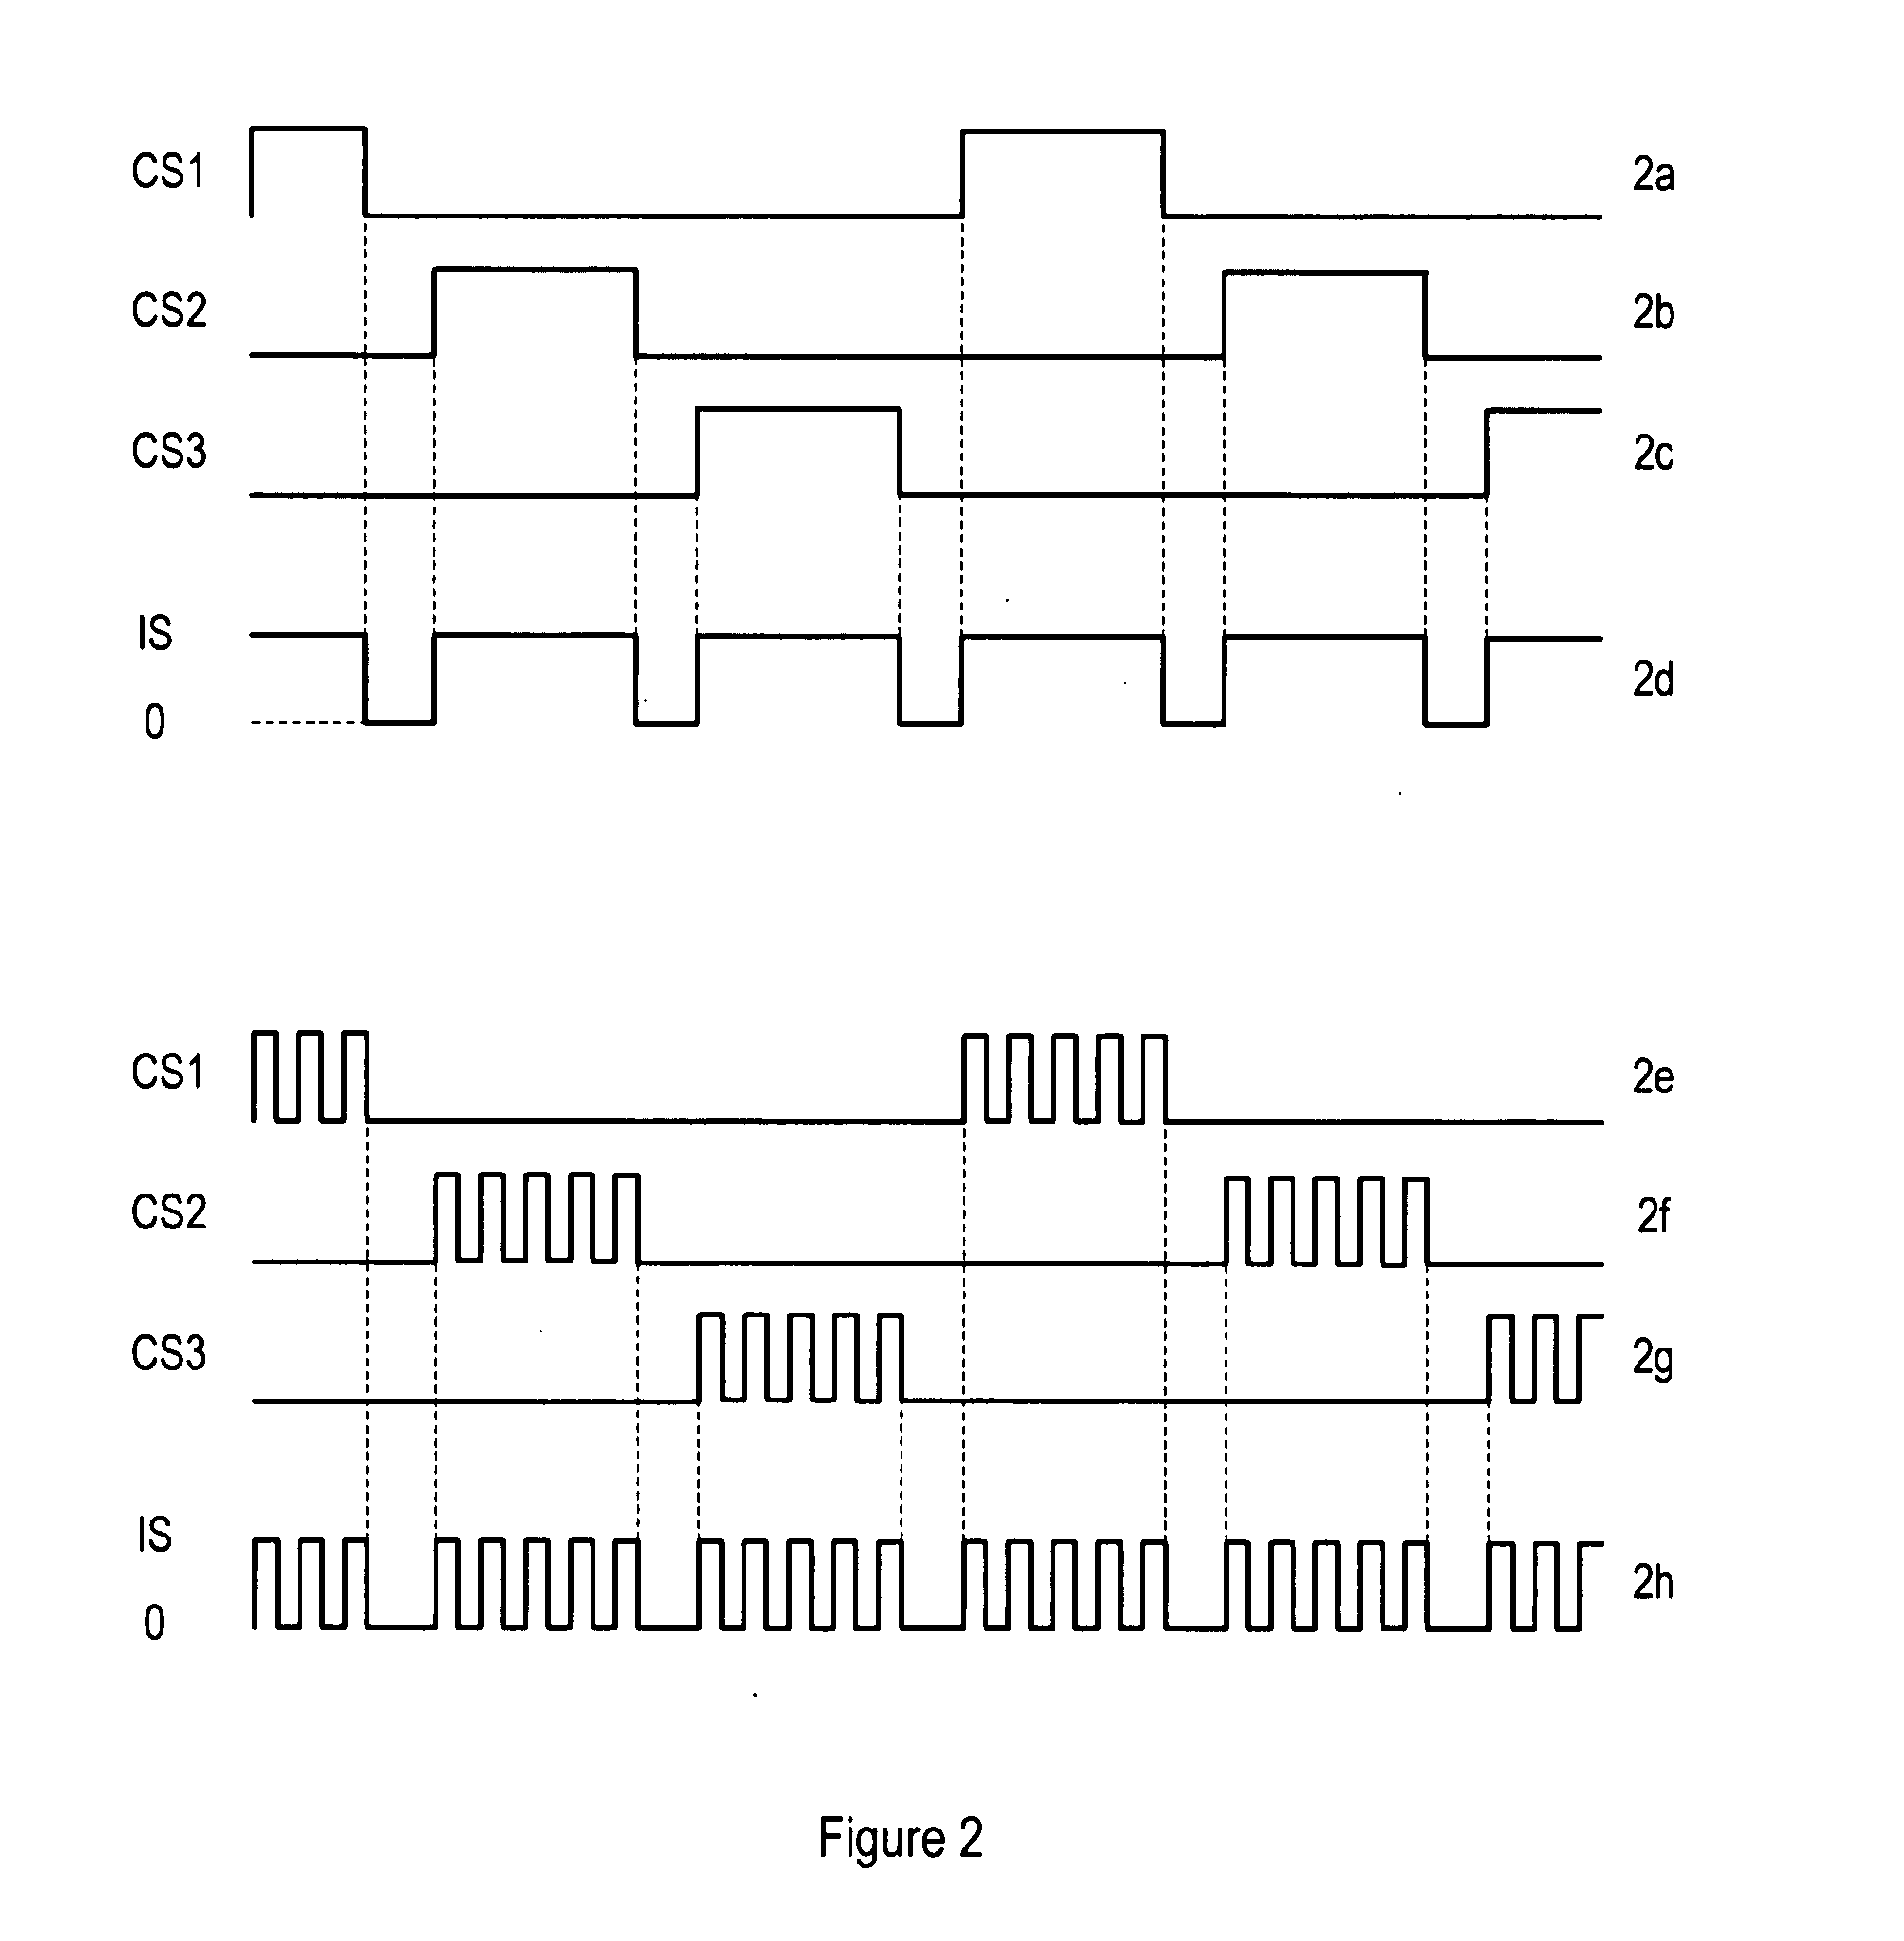 Driver apparatus and method